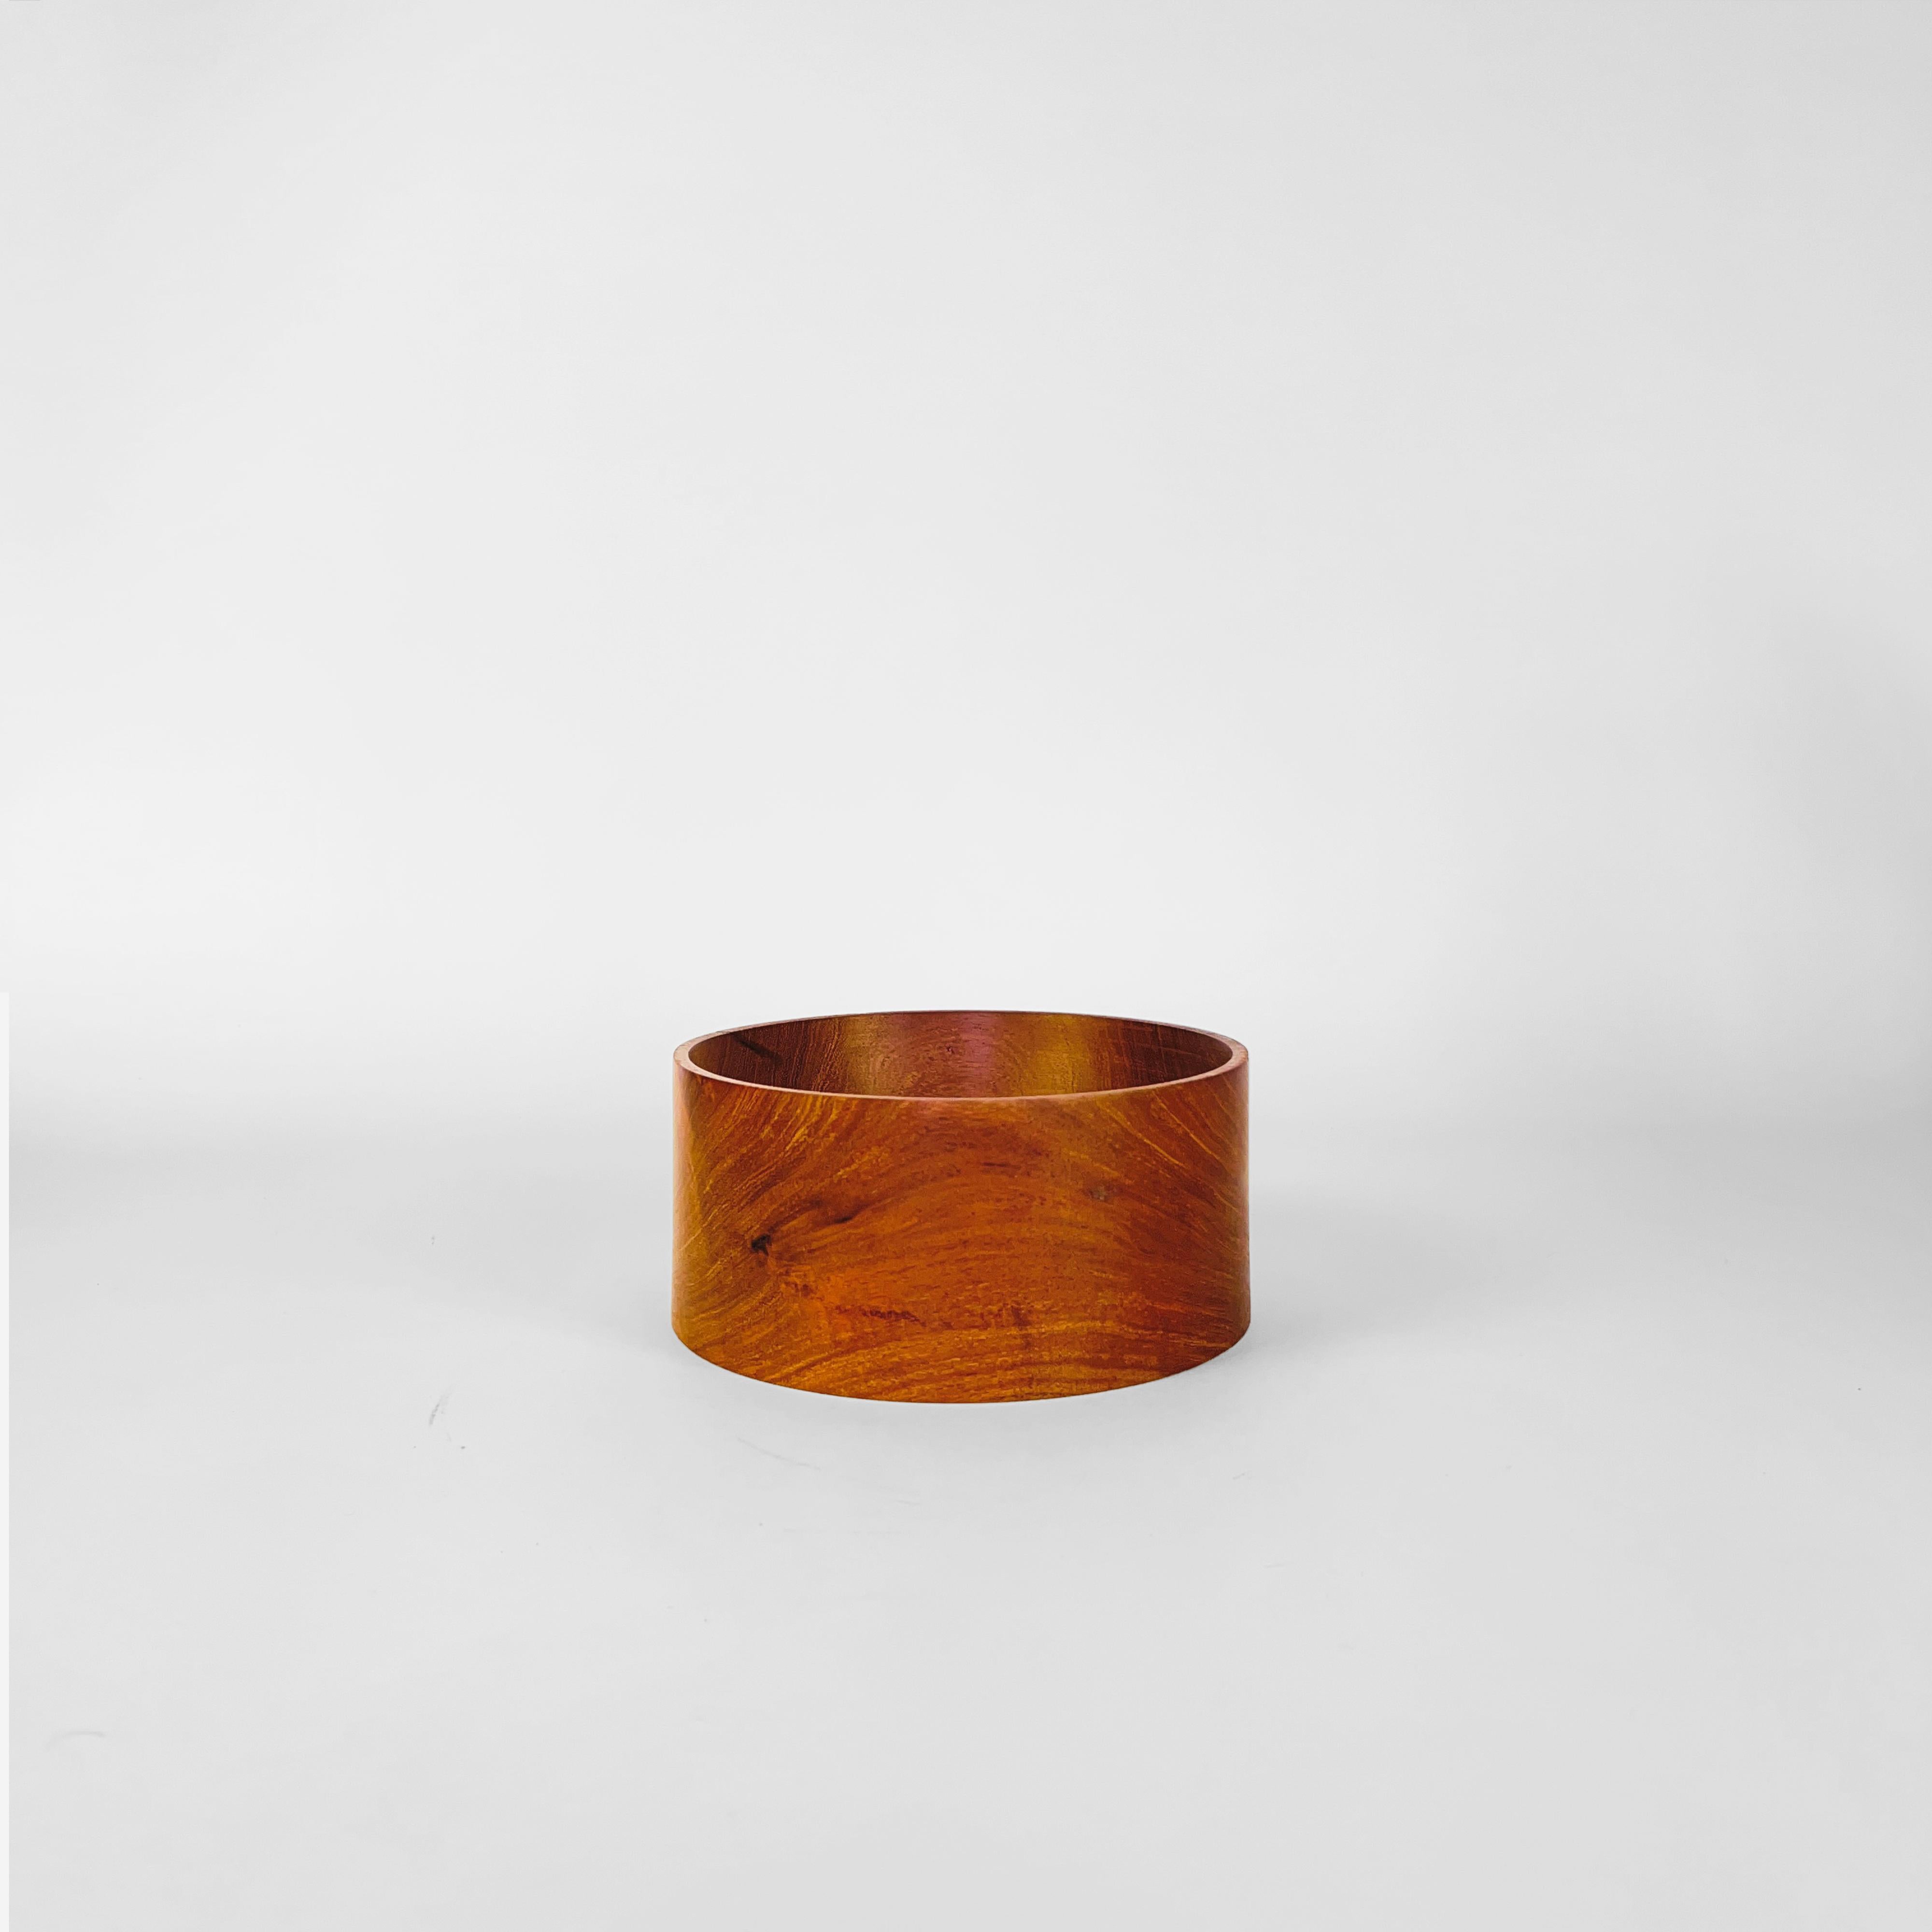 Hand-turned wooden bowl by Alta Pampa, Argentina.
The piece is made in Quebracho (Hardwood). The smooth finish reveals the material beautiful grain.
Stamped on the base.